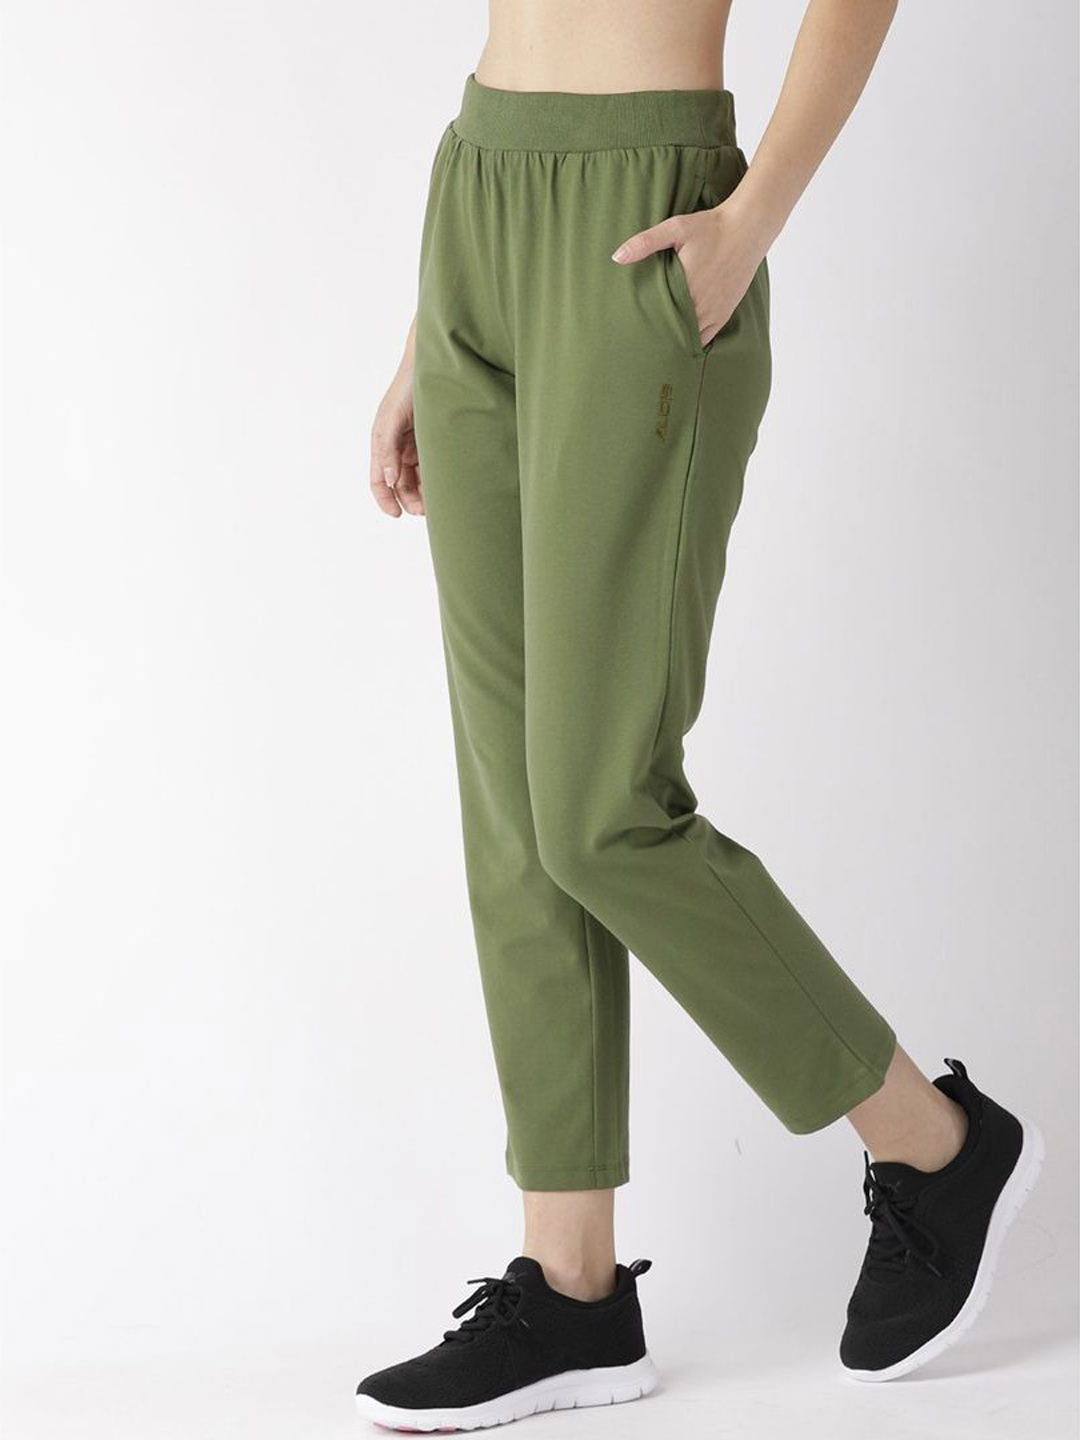 BRINLEY Linen Pants – Love and Confuse